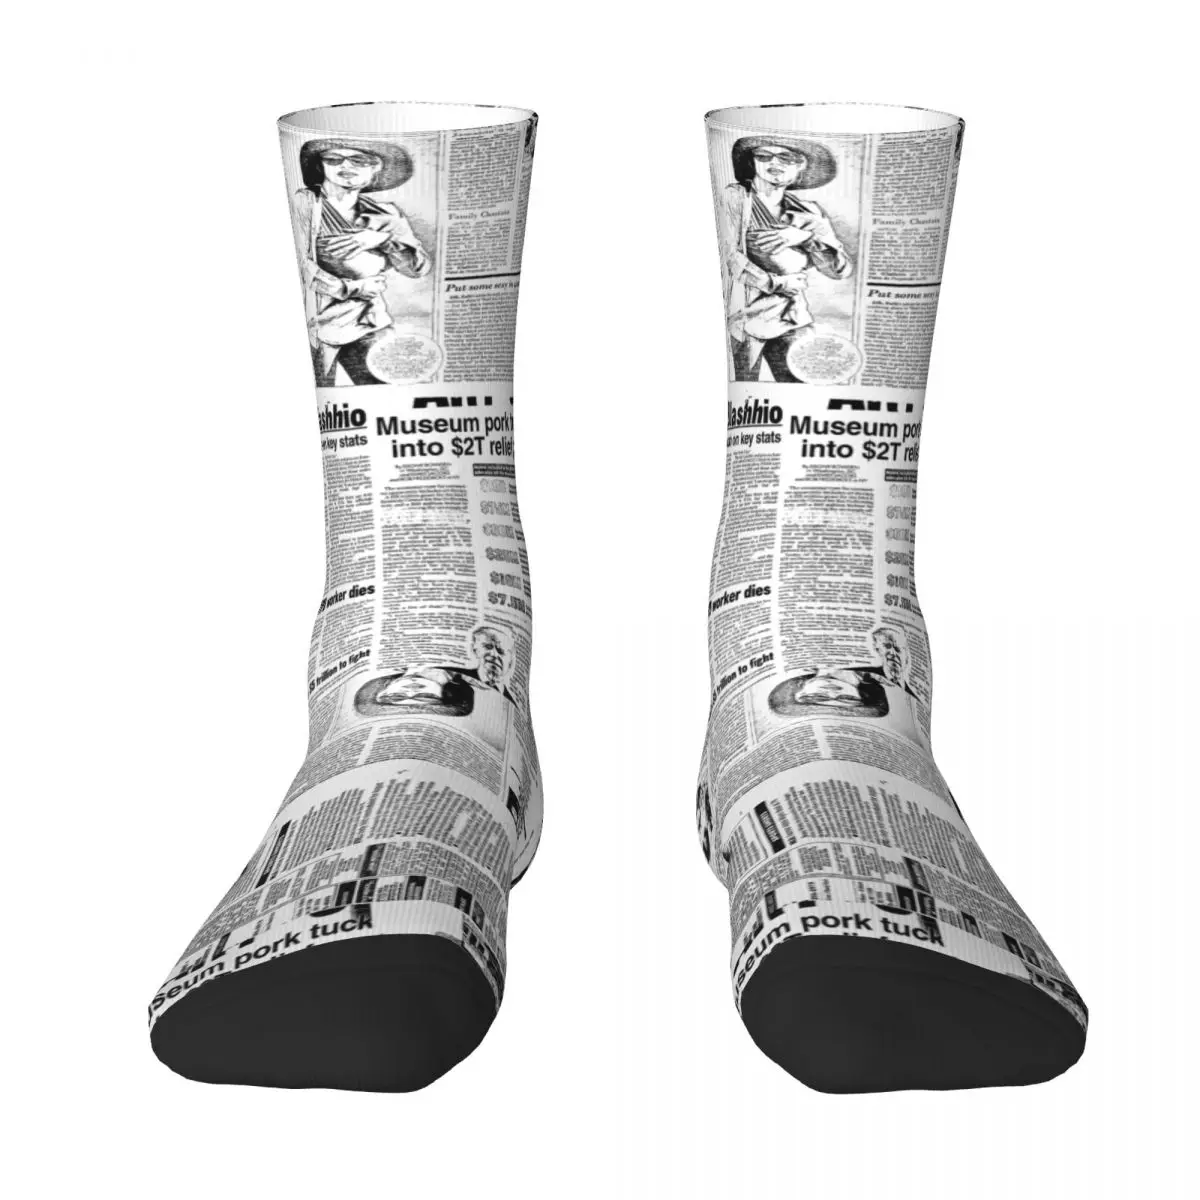 Black And White Papers Adult Socks Black and white,text,newspapers,vintage,decals,collage art Unisex socks,men Socks women Socks